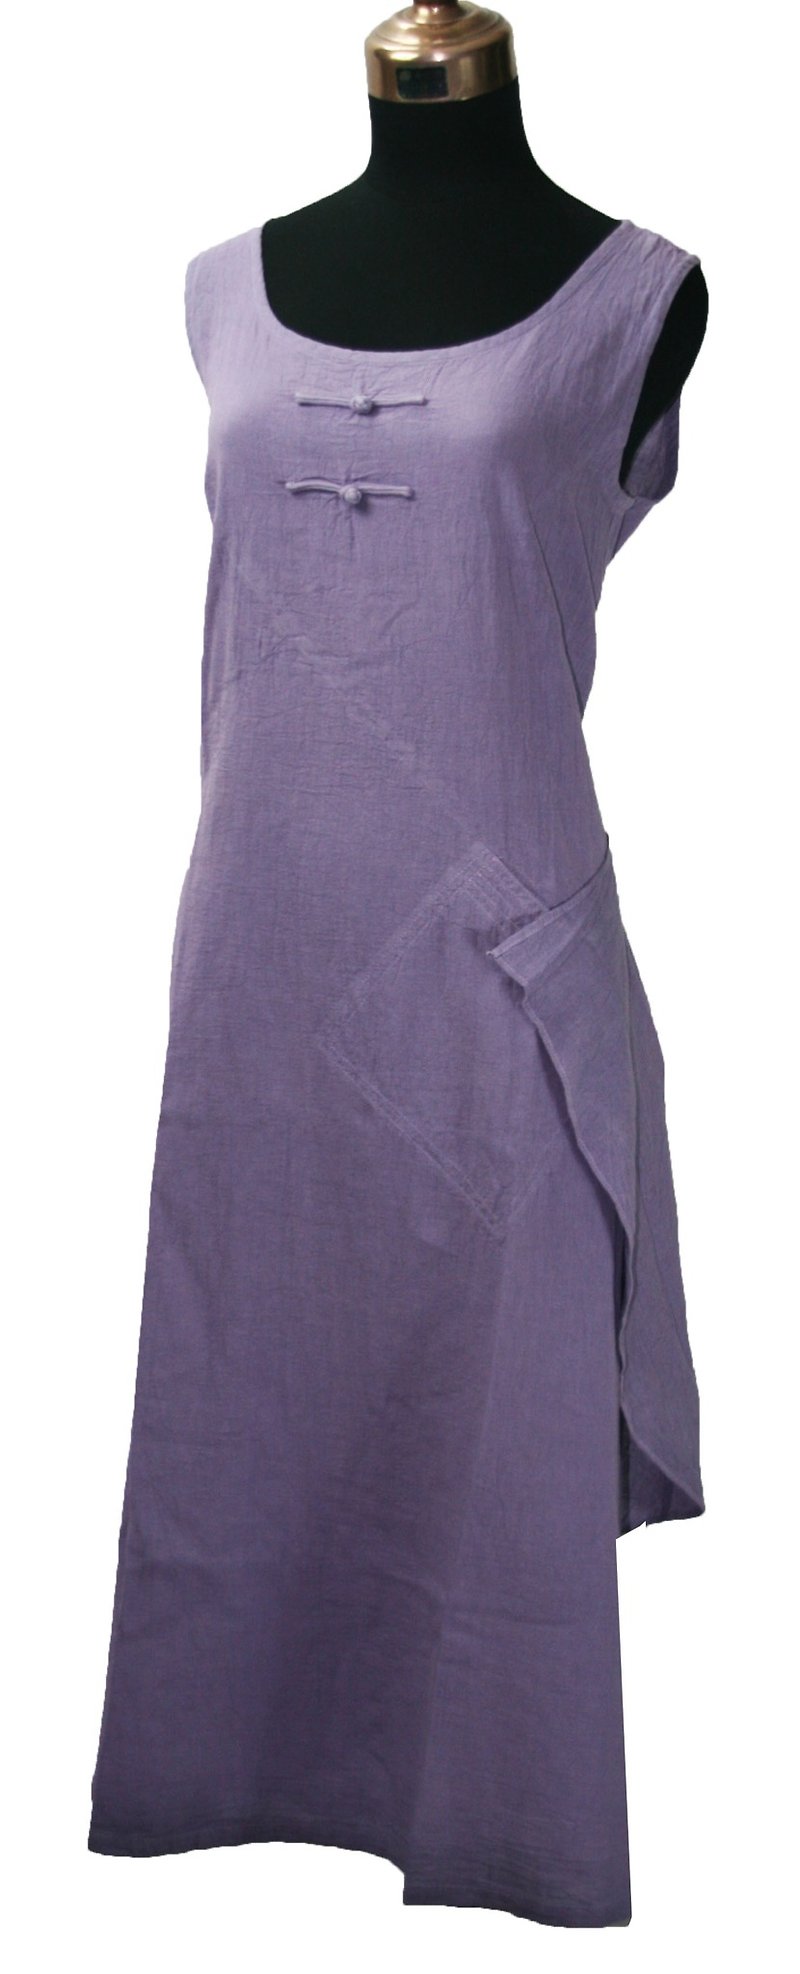 New literary Chinese dress for ladies, Chinese style Linen hand-dyed vintage clothing - One Piece Dresses - Cotton & Hemp 